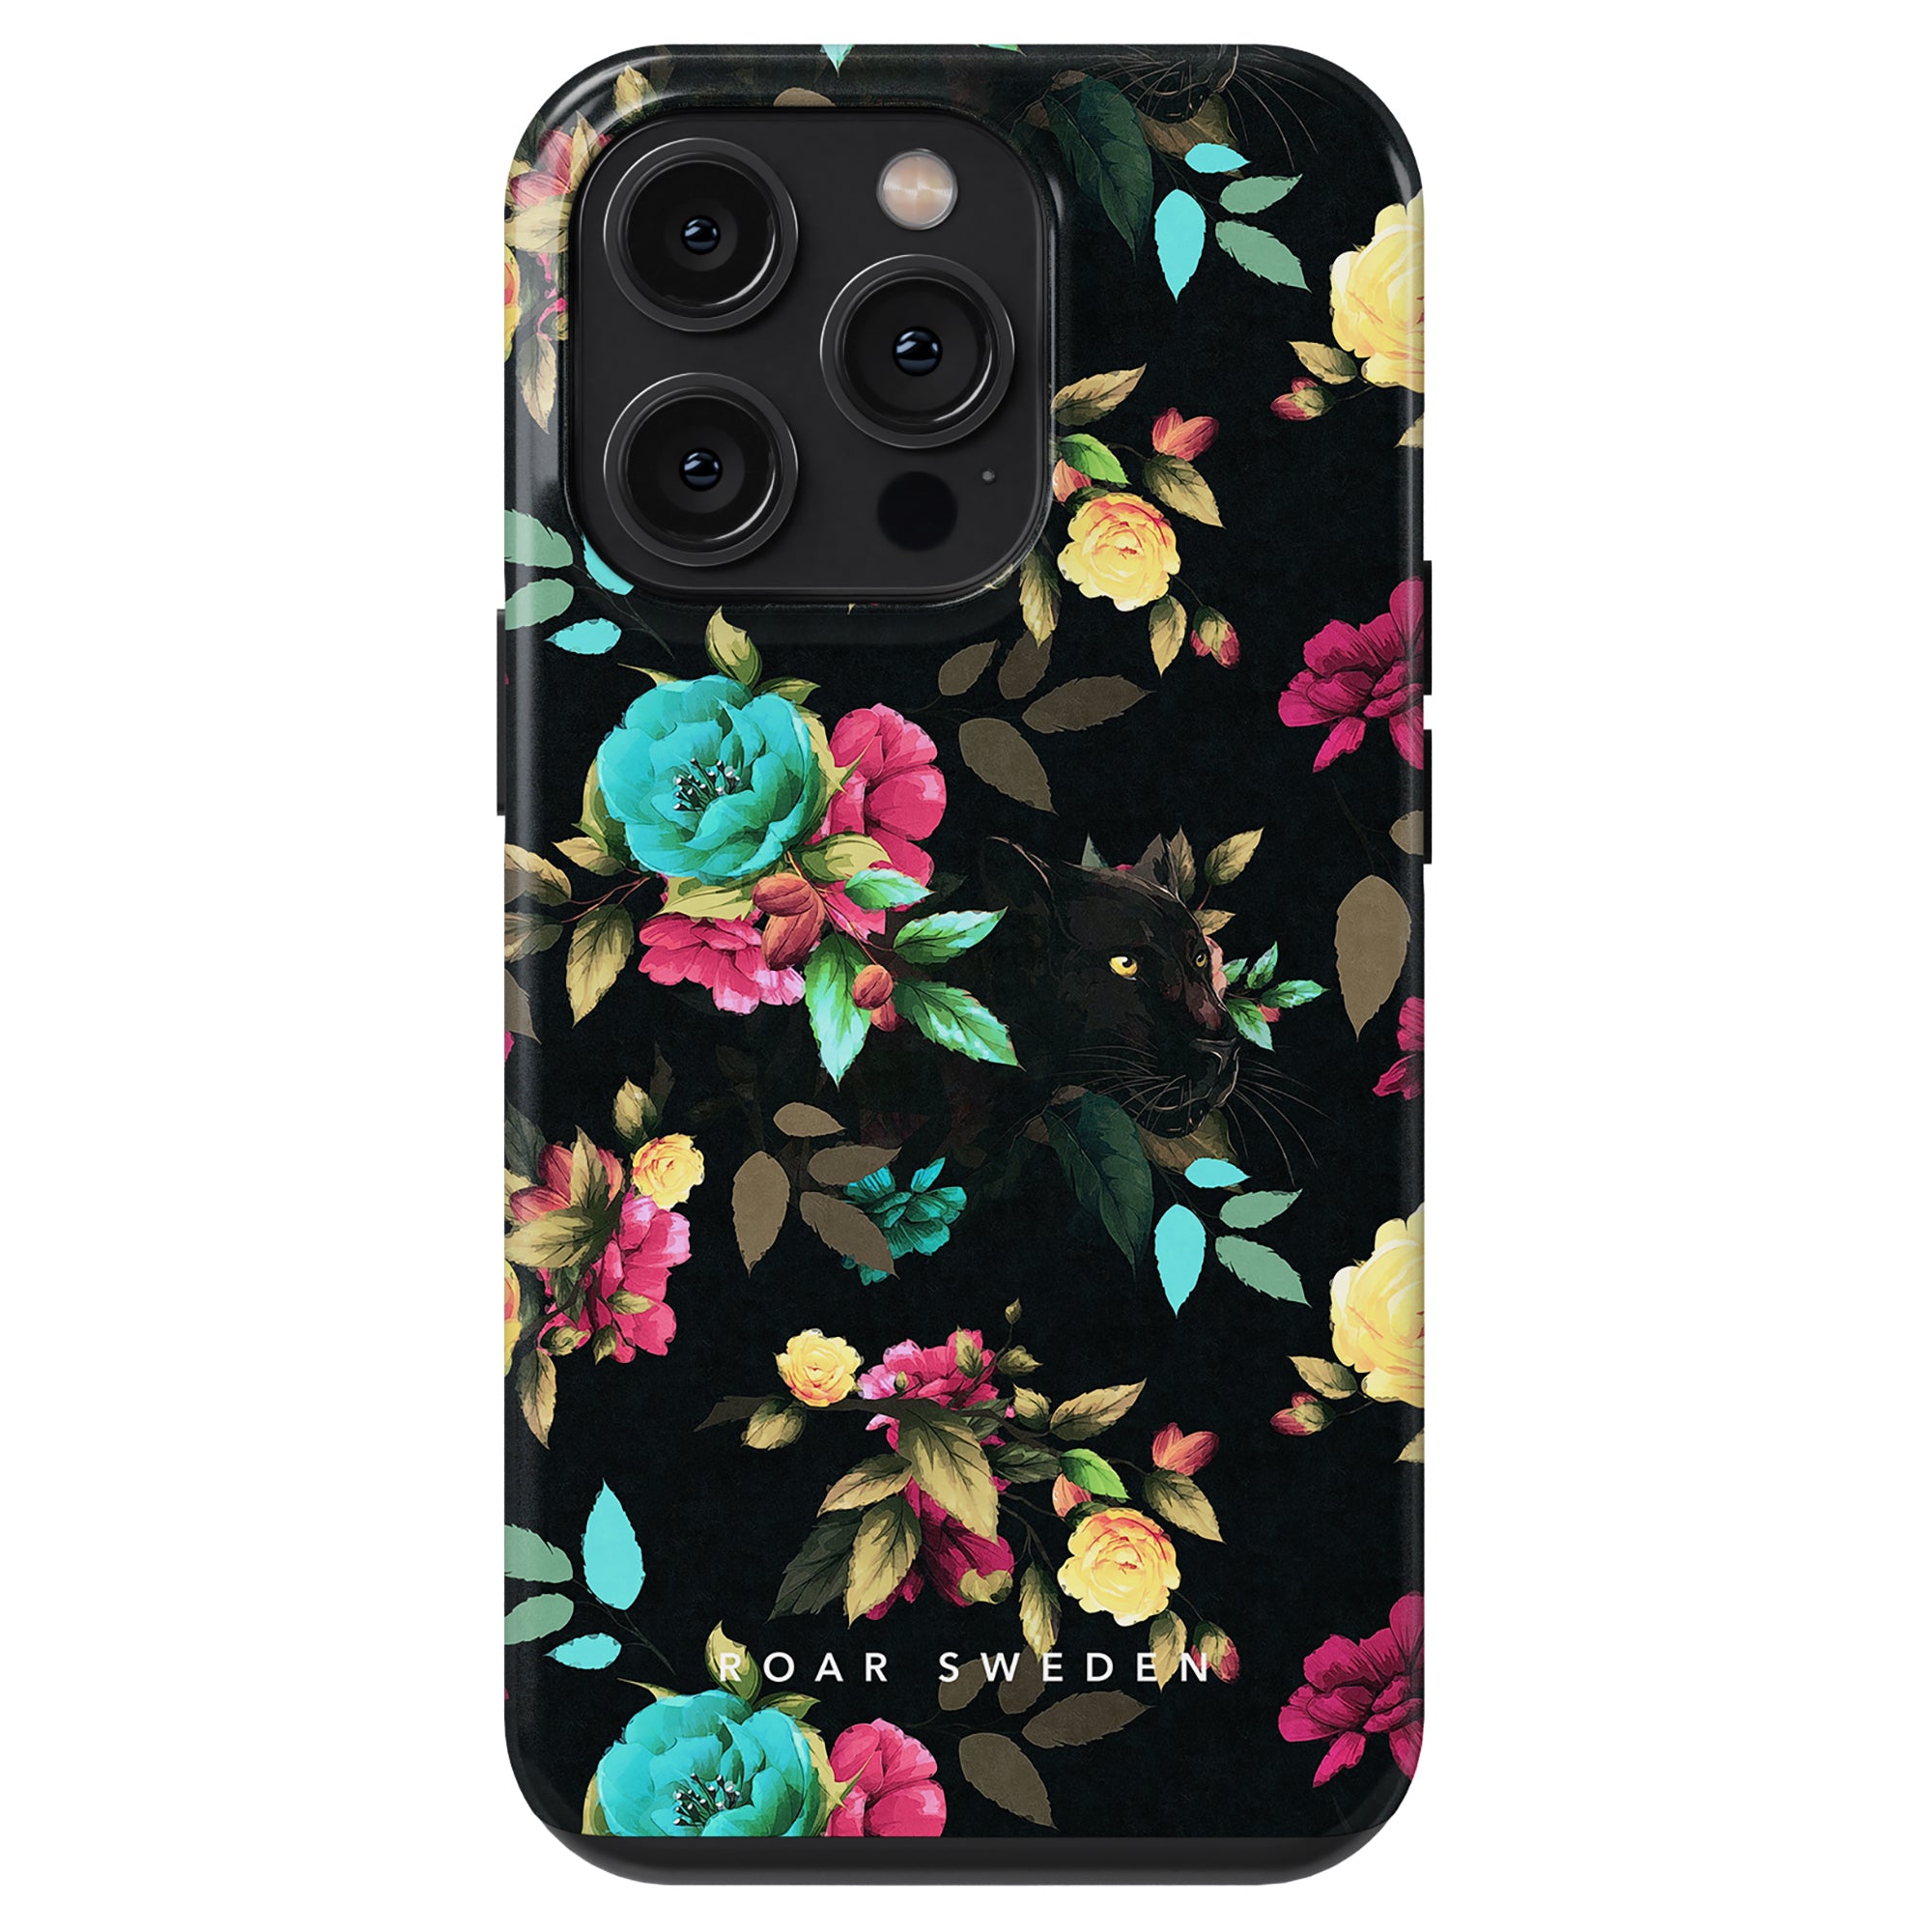 Black smartphone case with a floral pattern featuring colorful roses and a small hidden rabbit, branded as "Bloom Panther" tough case.